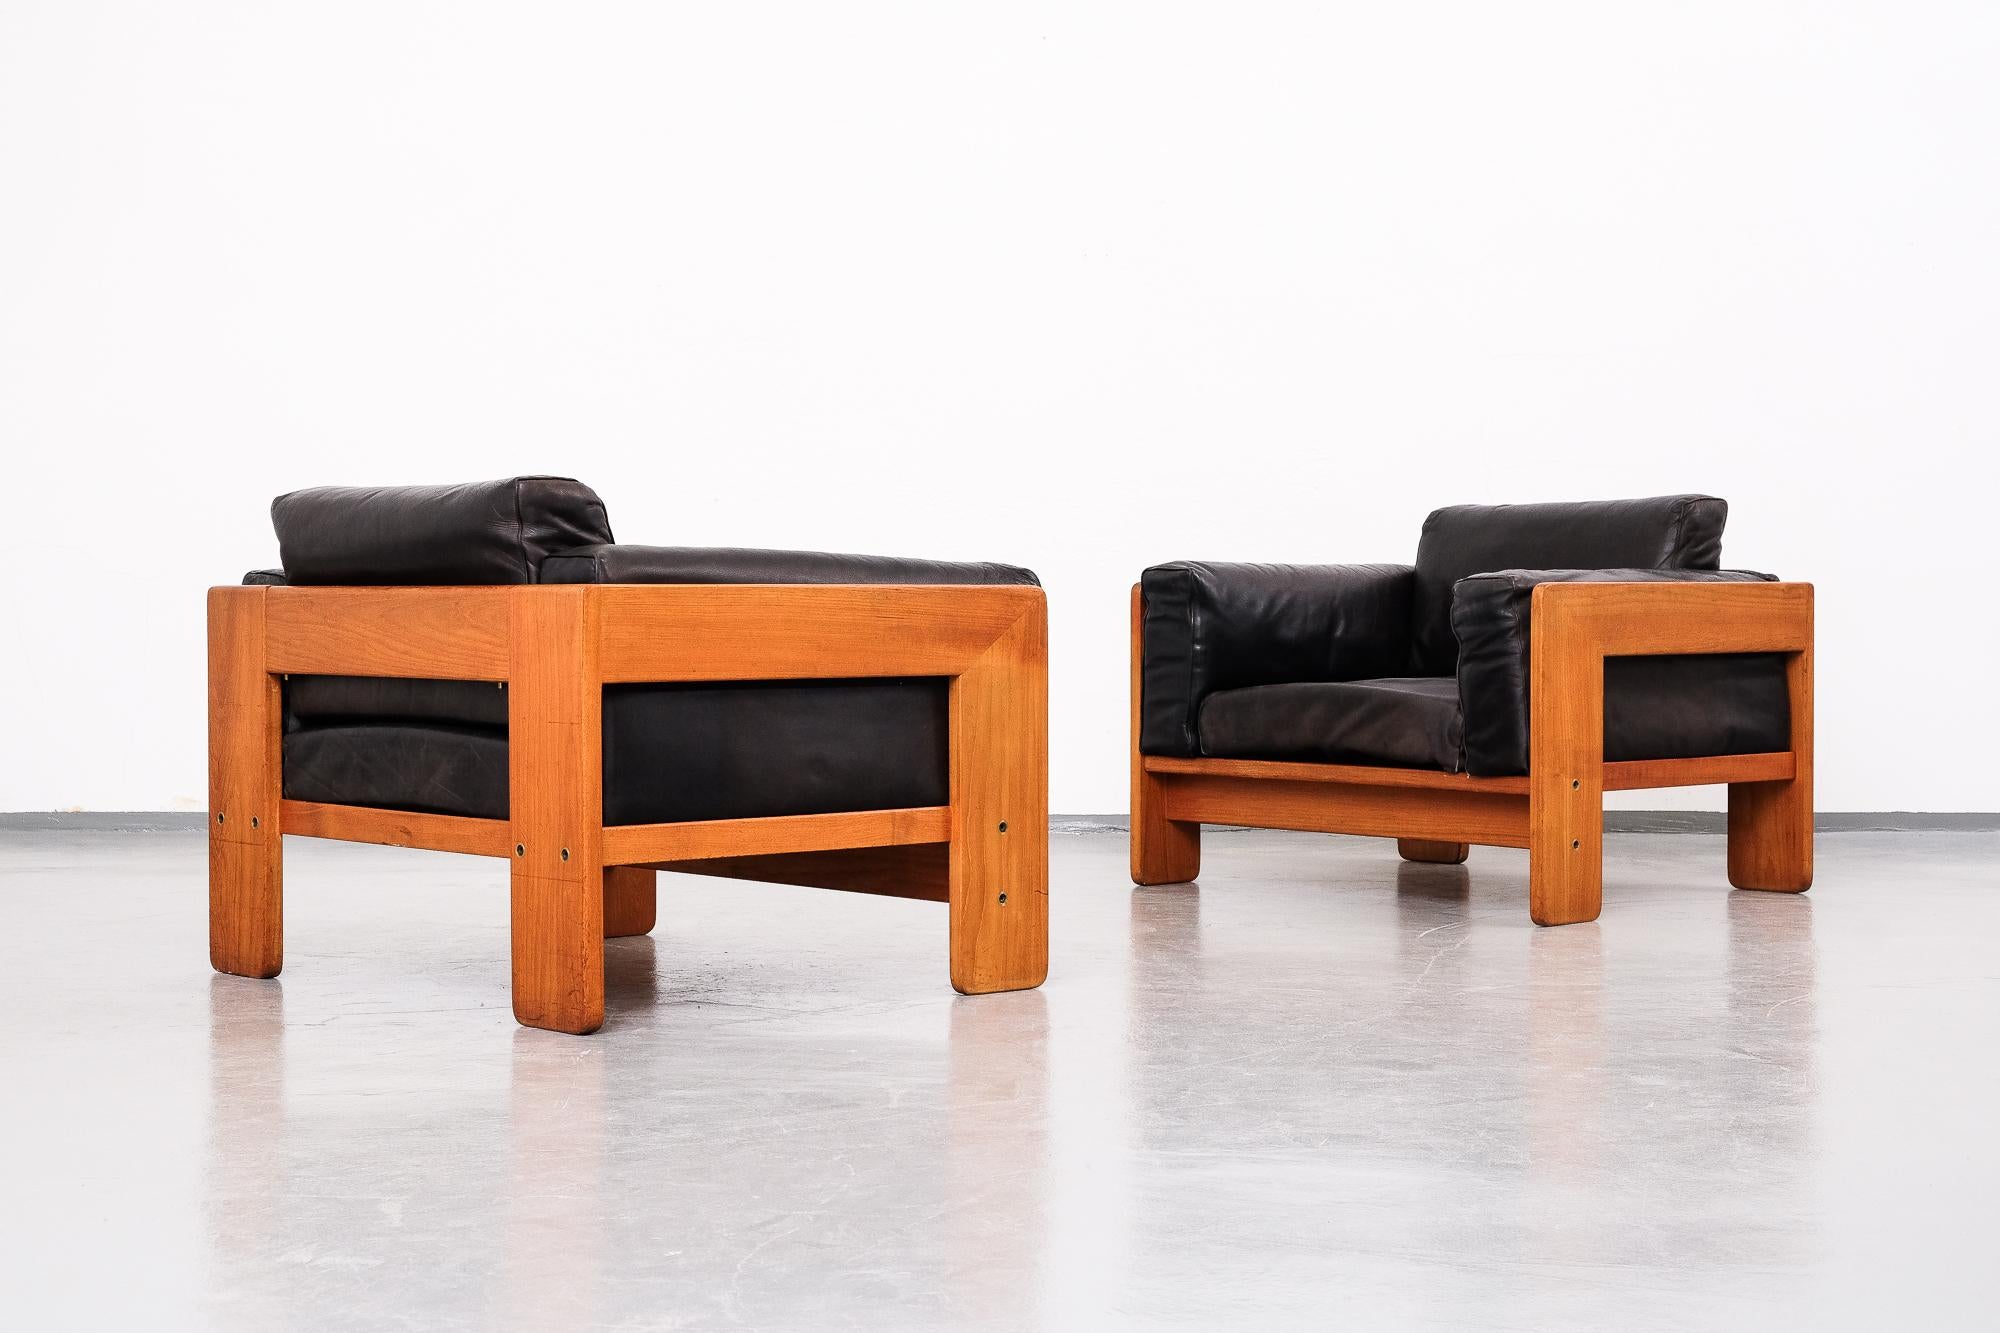 Lounge chairs model 'Bastiano' designed by Tobia Scarpa in 1960s. Teak frames and black leather. Produced by Haimi Oy in Finland.